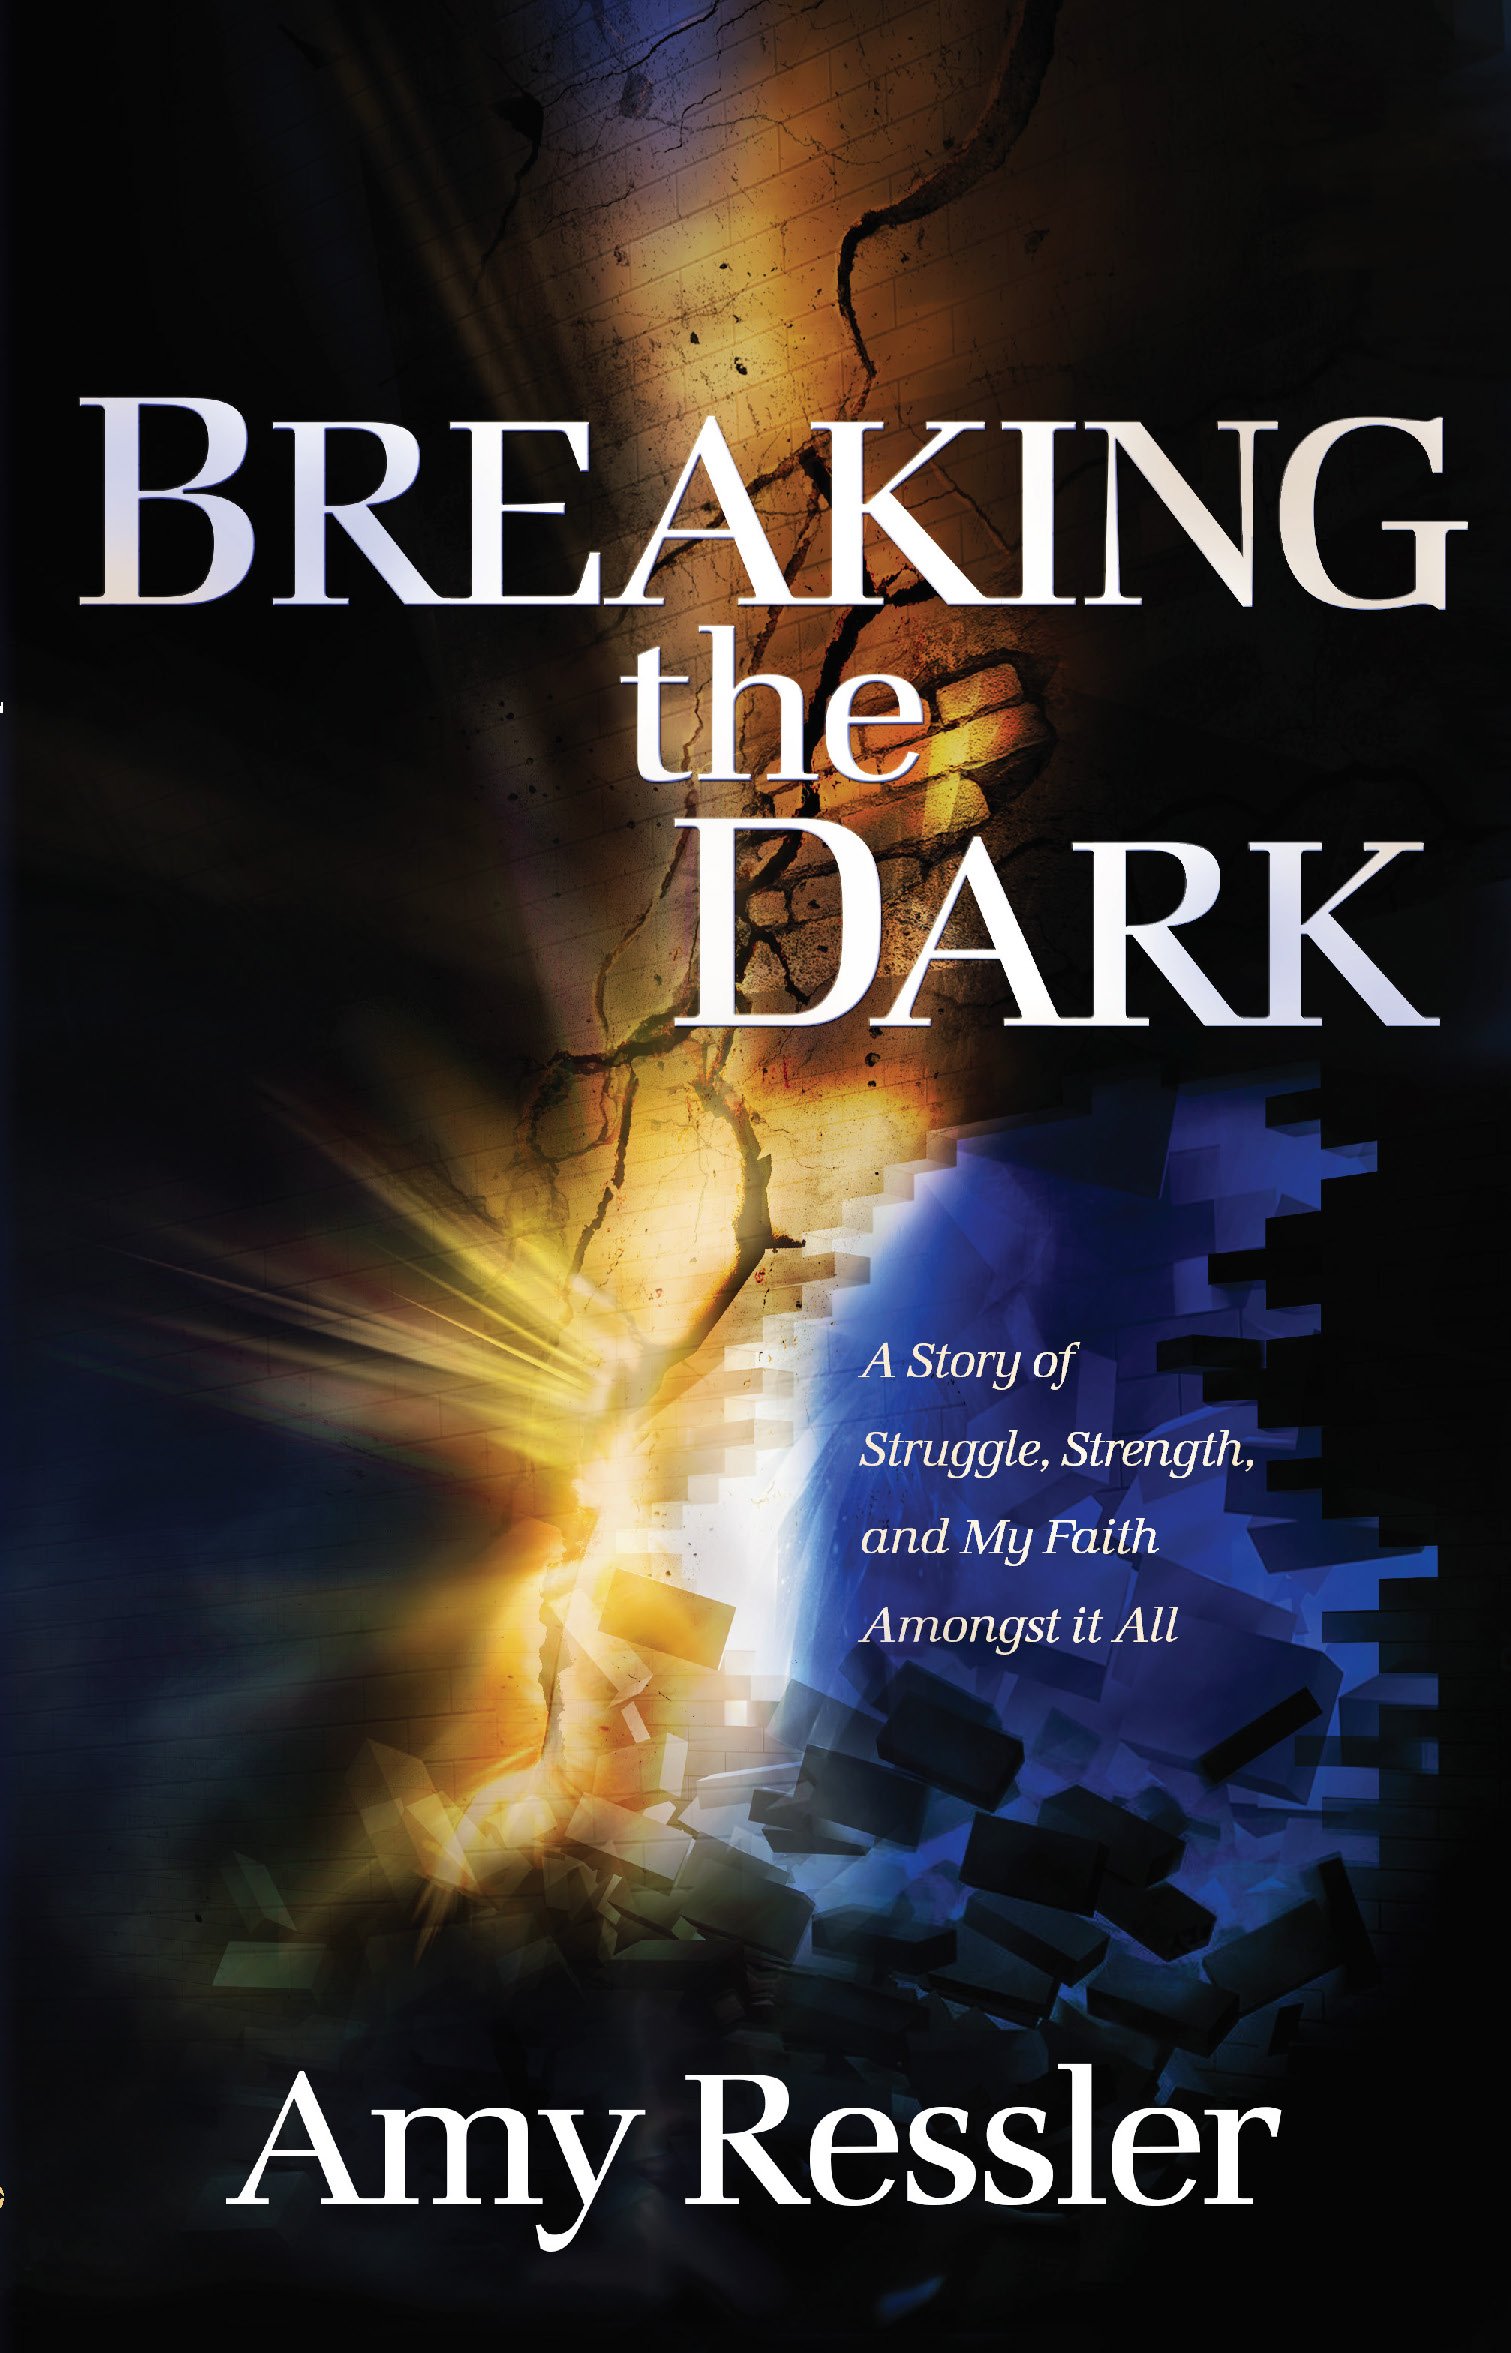 Breaking the Dark: A Story of Struggle, Strength, and My Faith among It All